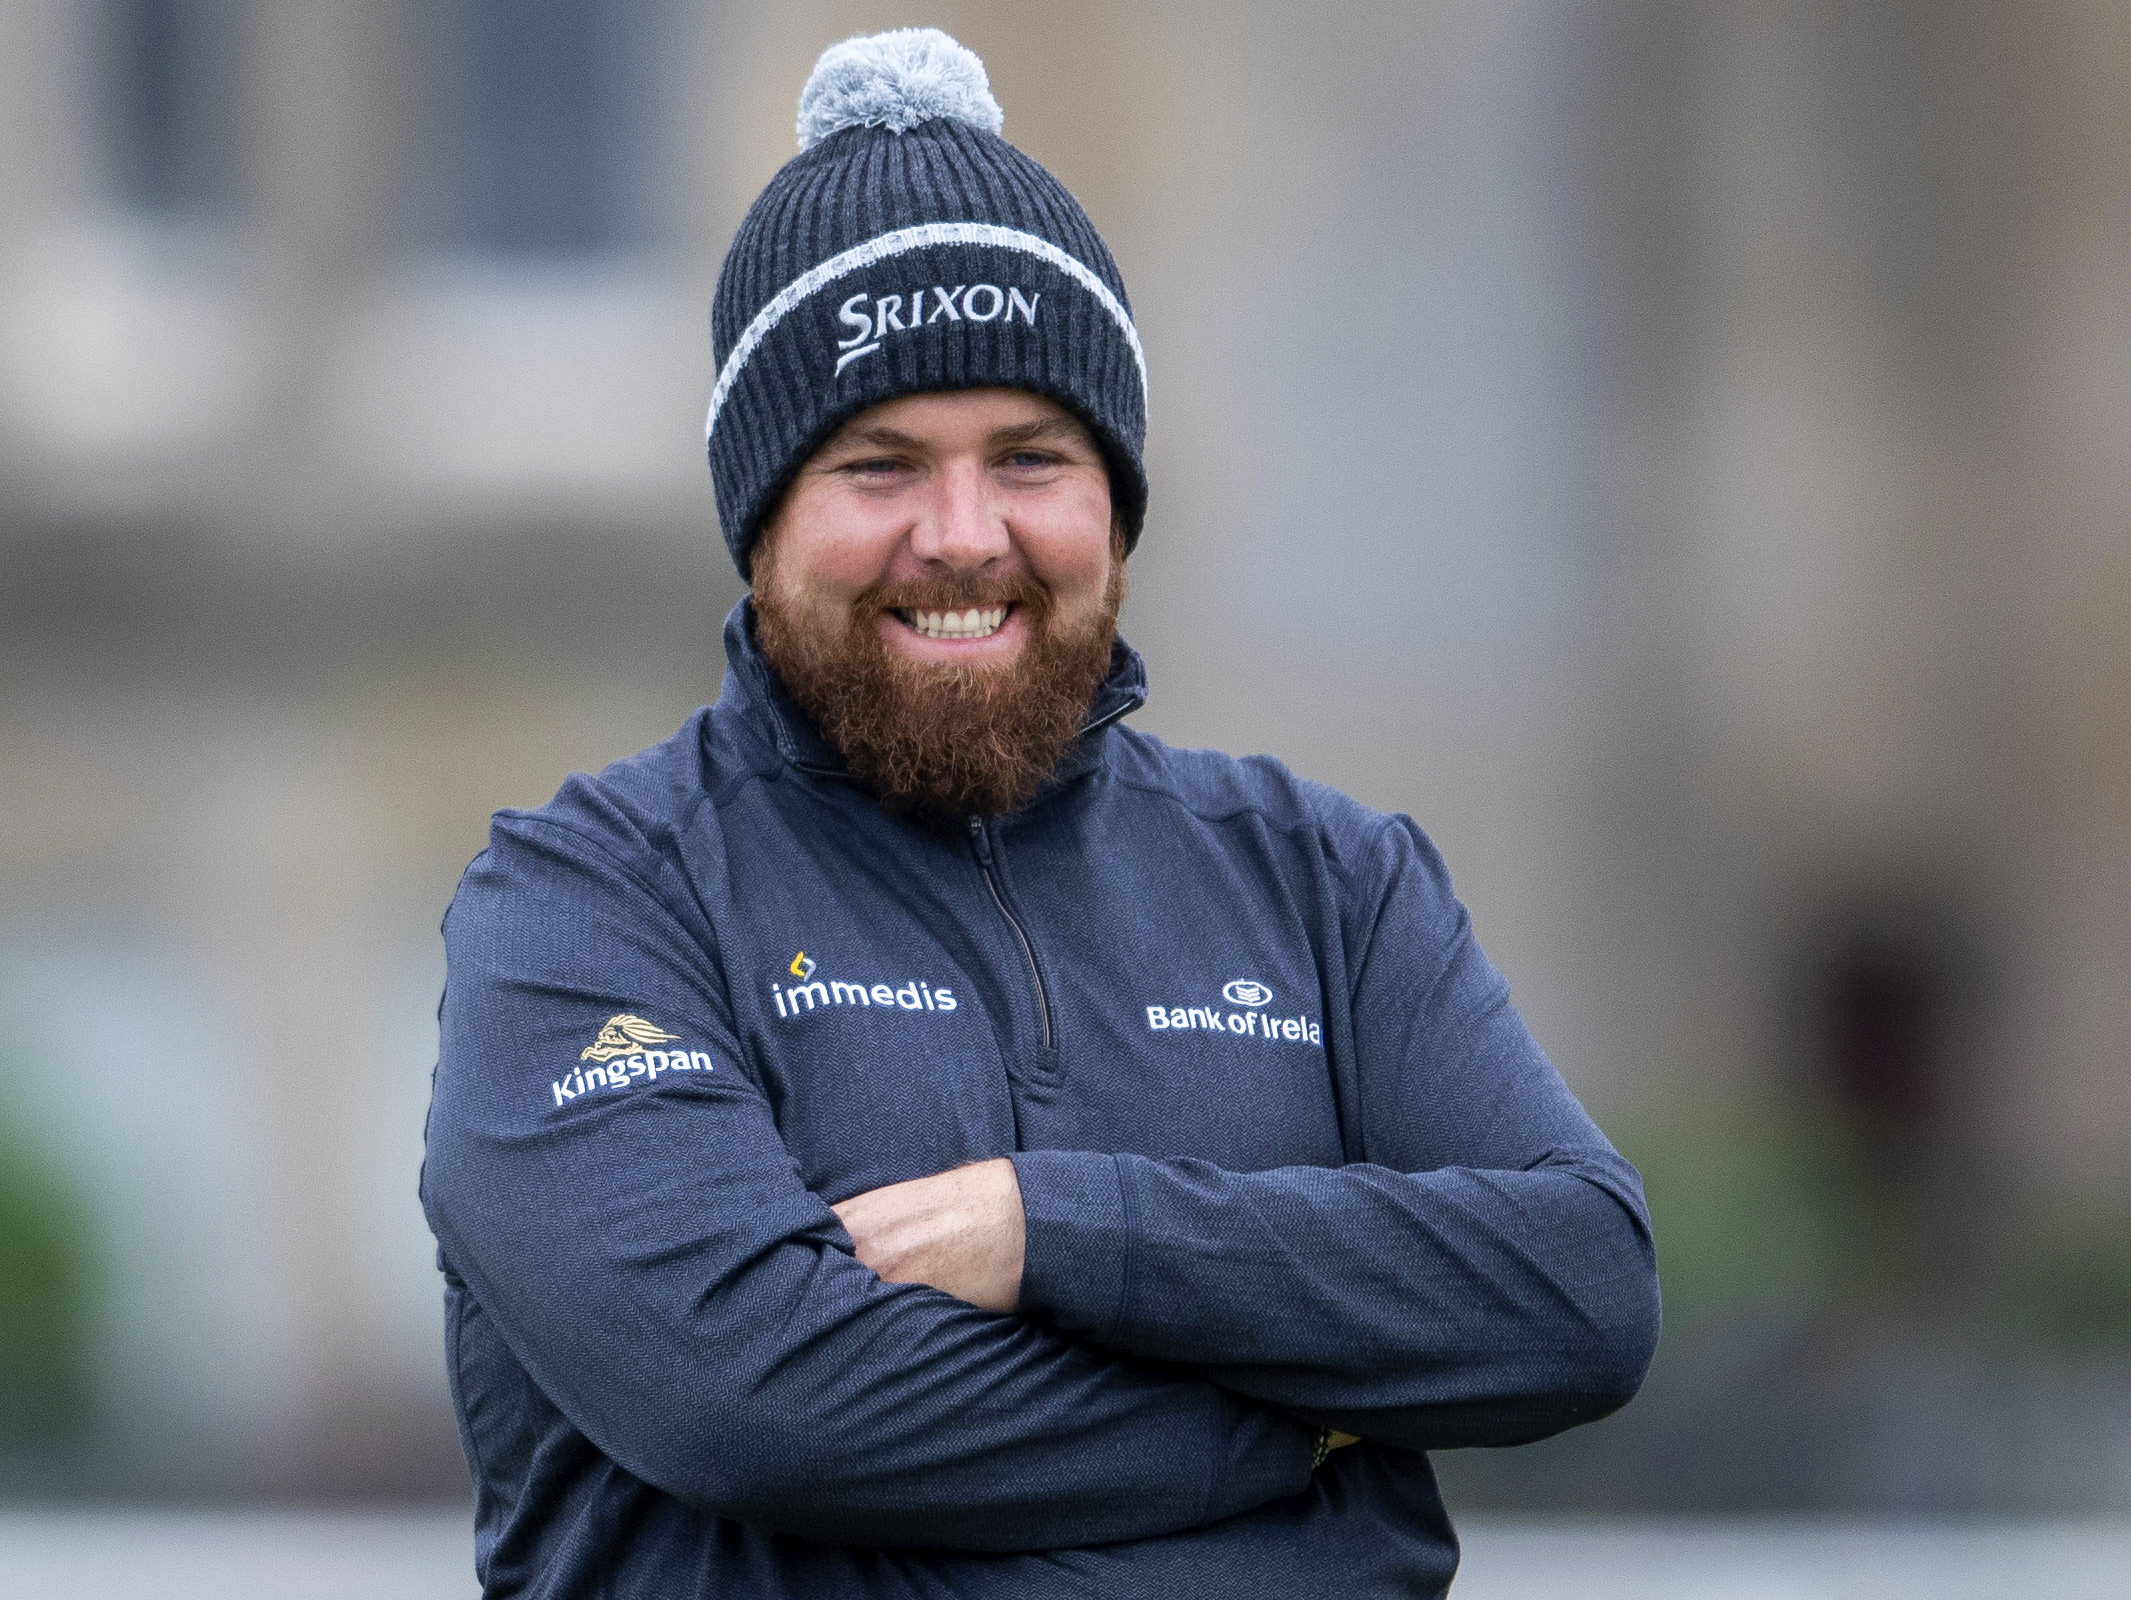 Shane Lowry during Dunhill Links at St Andrews.